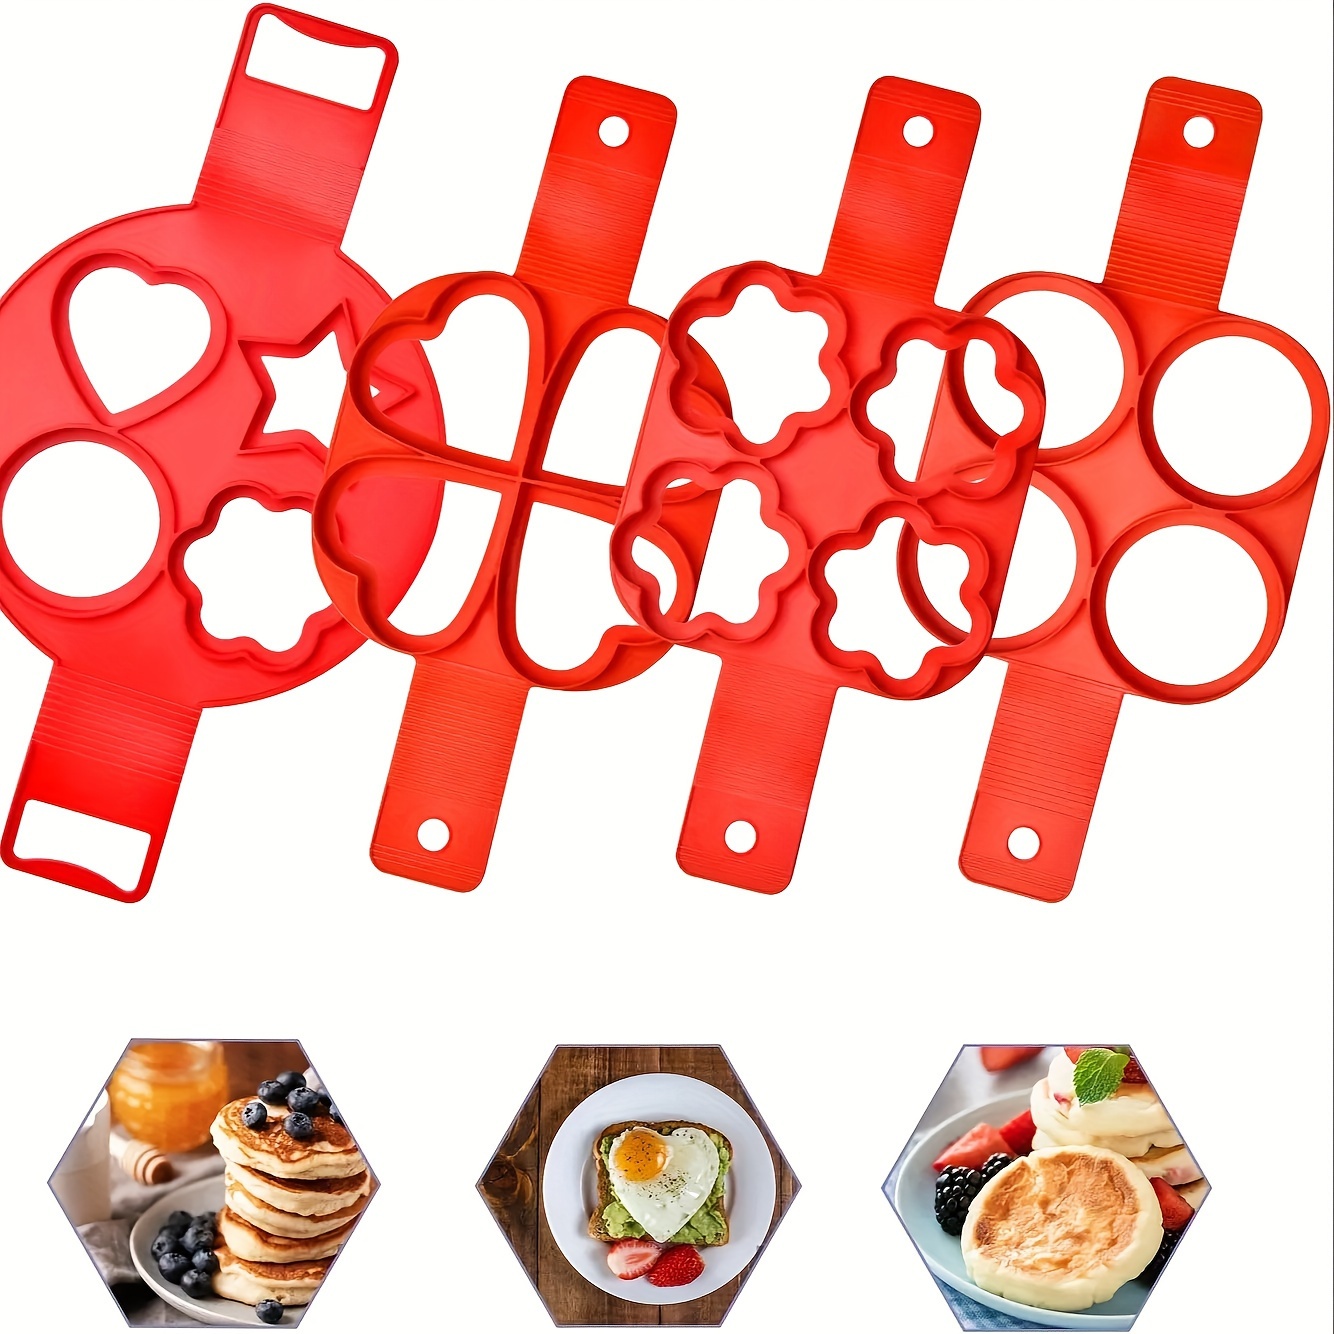 Stampo padella in silicone per pancakes frittelle omelette antiaderente  stampi